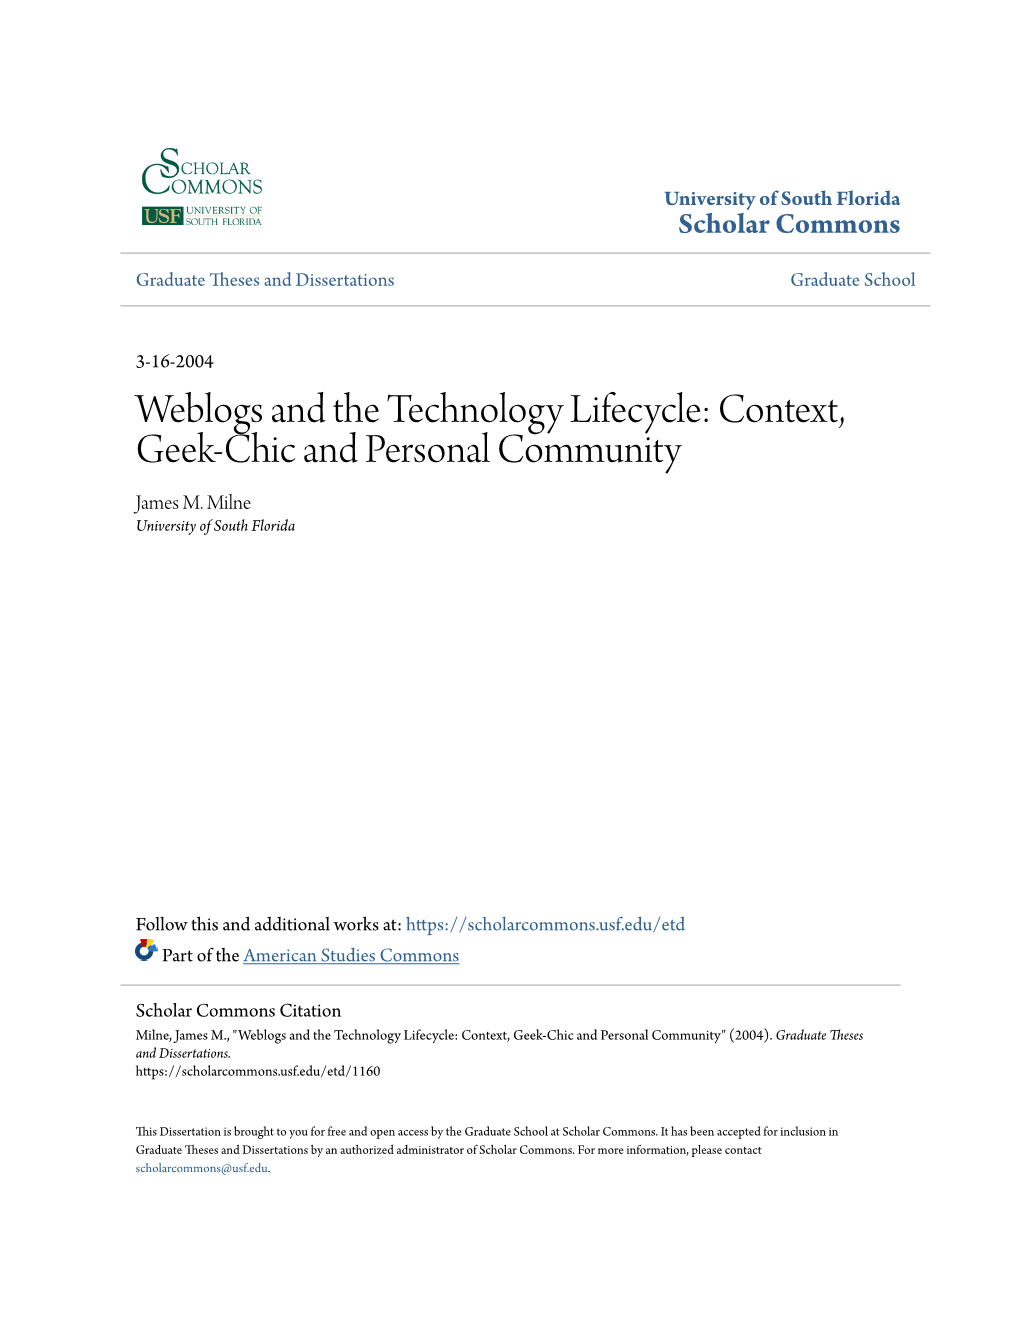 Weblogs and the Technology Lifecycle: Context, Geek-Chic and Personal Community James M